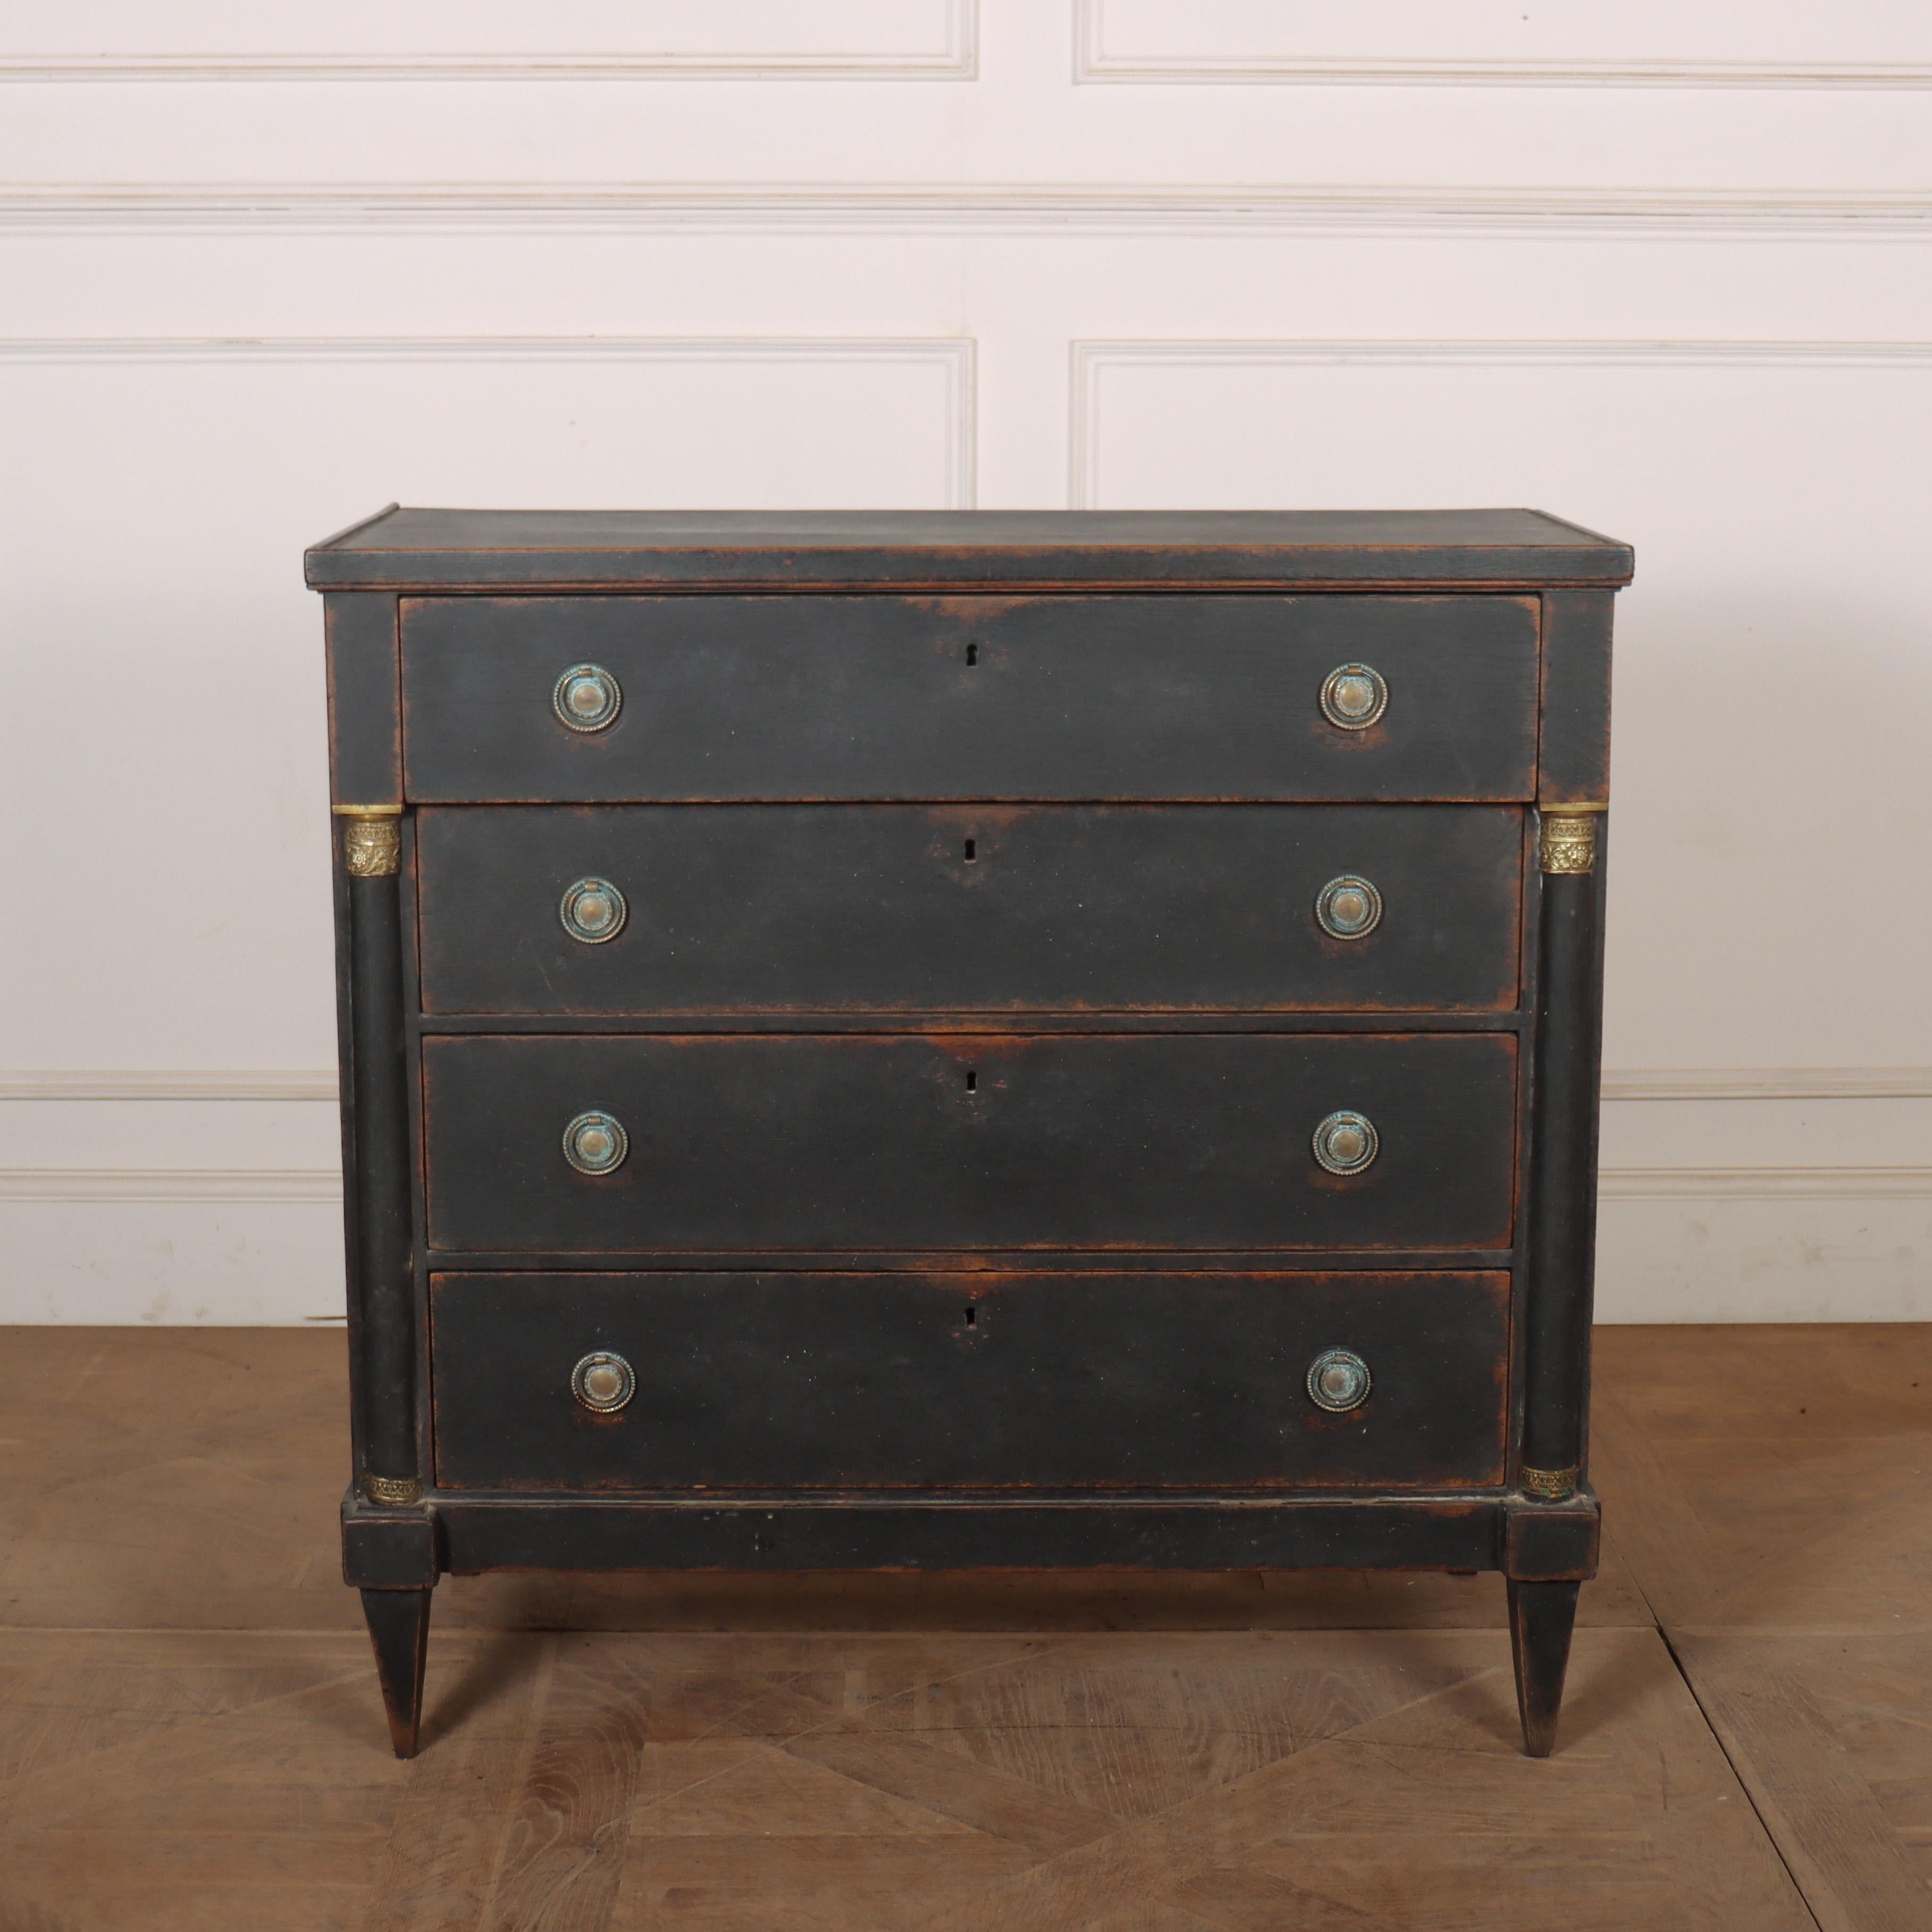 Early 19th C Swedish painted 4 drawer oak commode. 1820

Reference: 8336

Dimensions
37.5 inches (95 cms) Wide
18.5 inches (47 cms) Deep
36.5 inches (93 cms) High